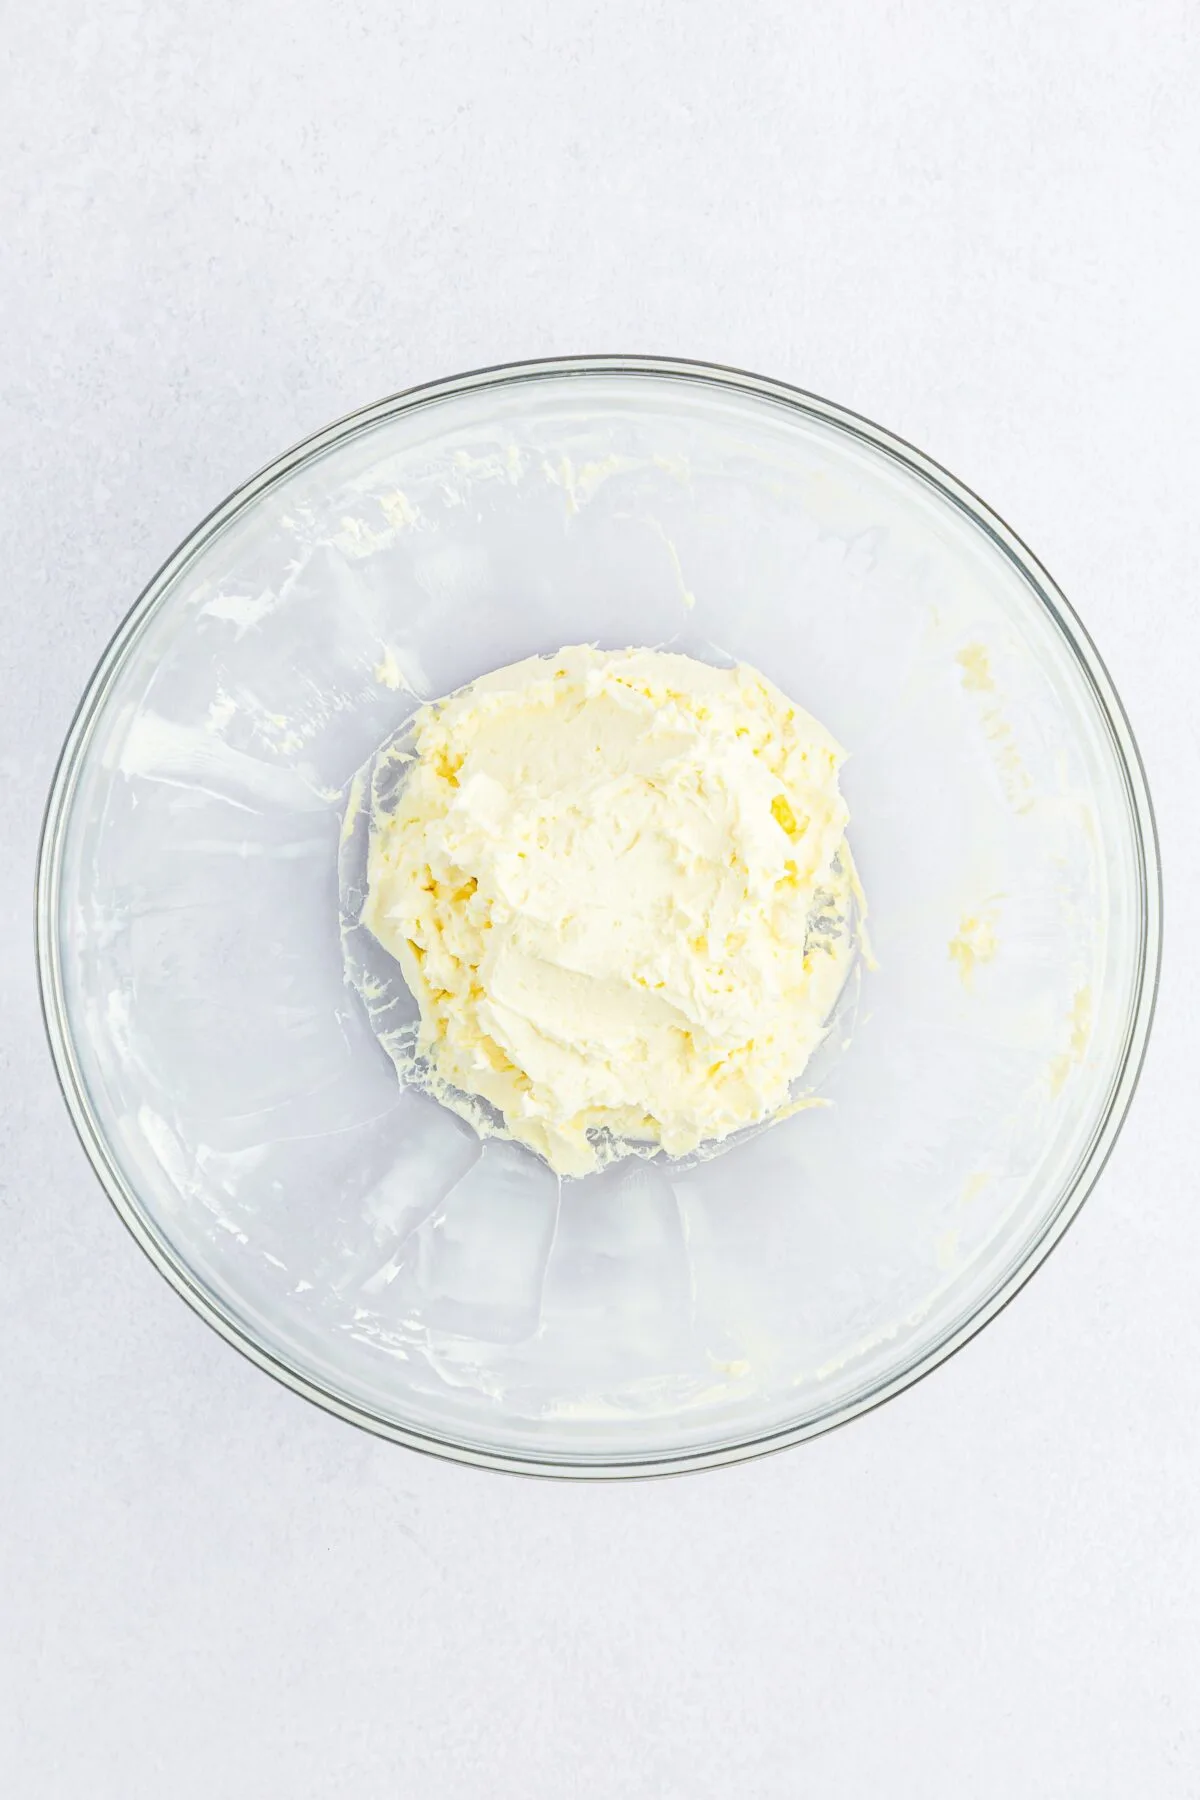 Cream cheese beat until smooth and creamy in a glass bowl.